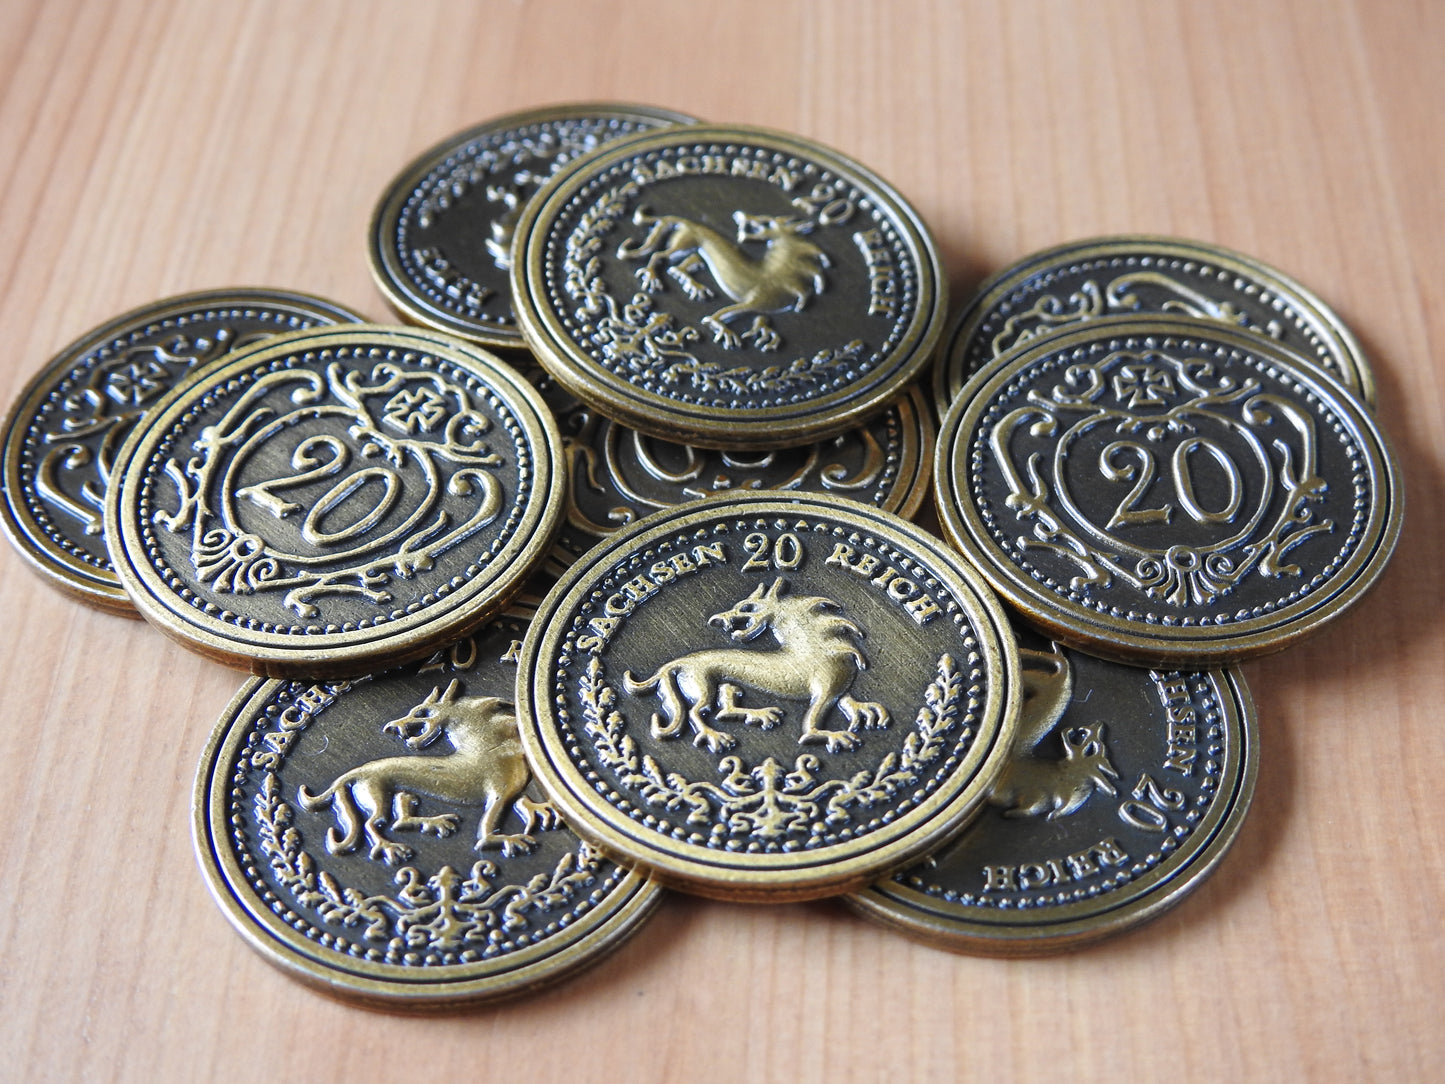 Close-up view of the gold $20 coins.